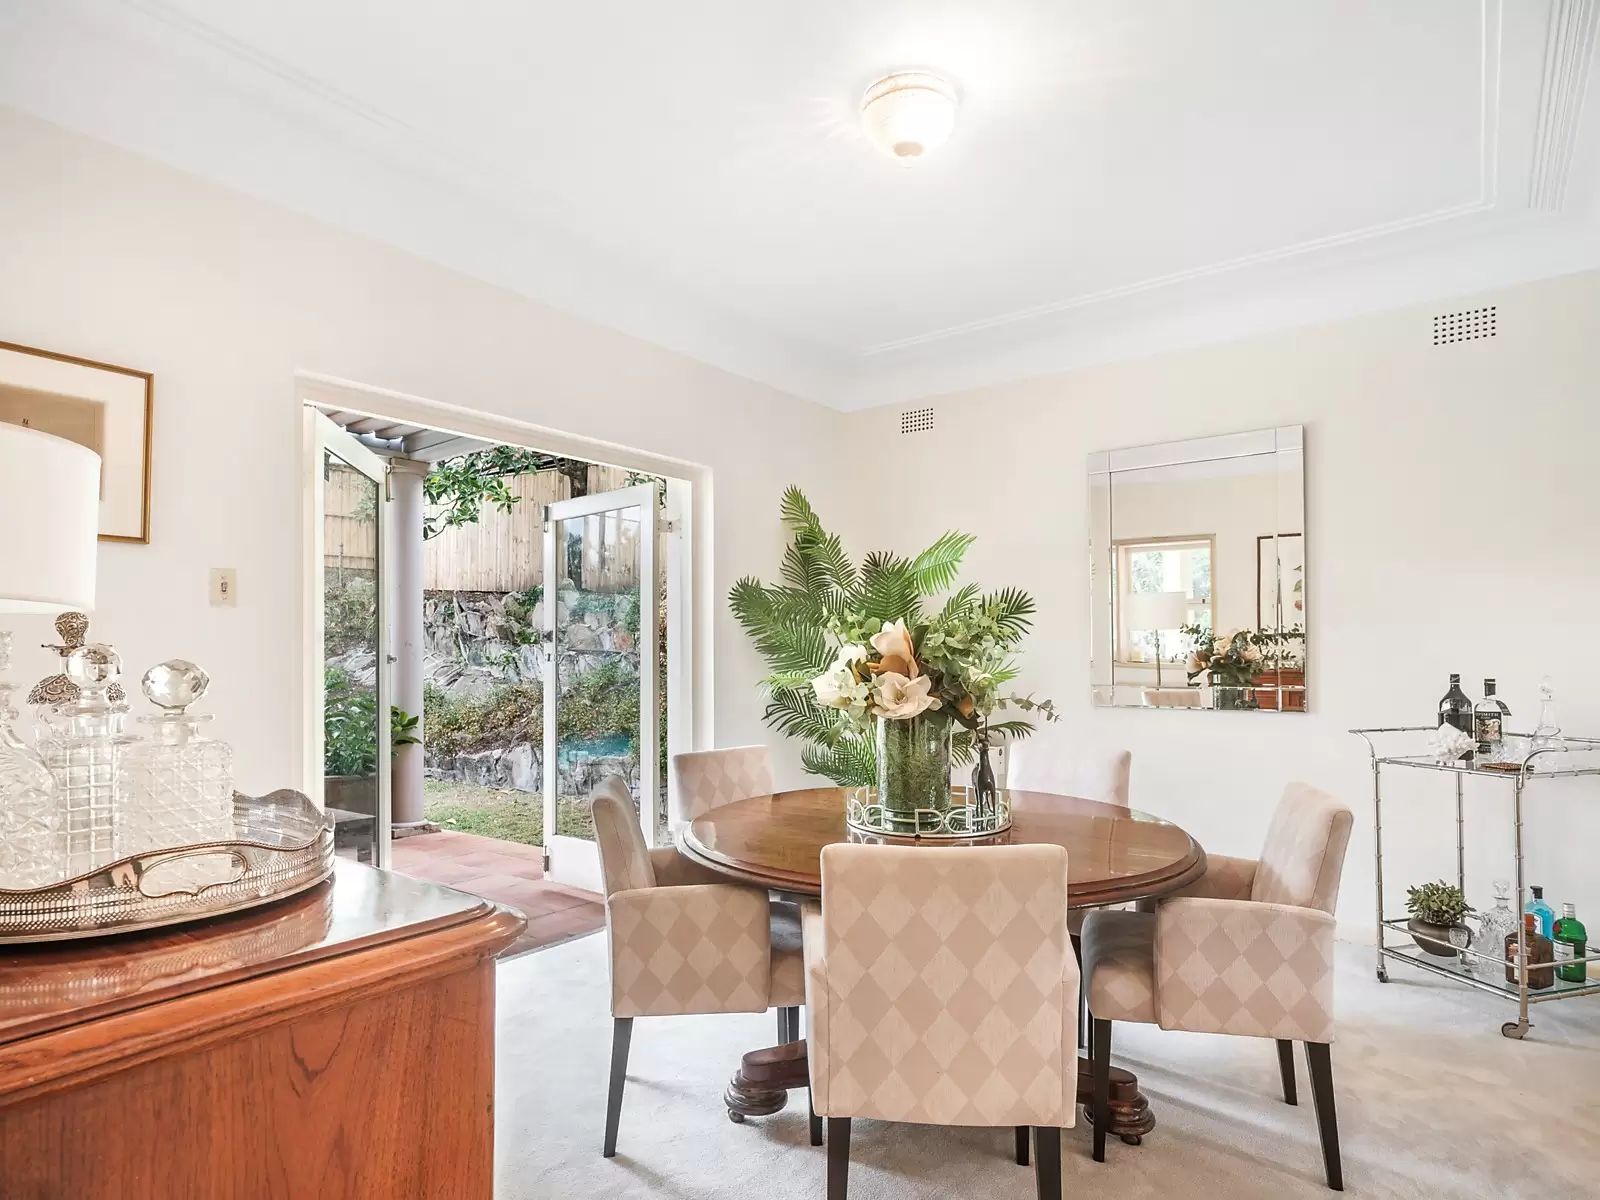 Photo #6: 16 Mansion Road, Bellevue Hill - Sold by Sydney Sotheby's International Realty